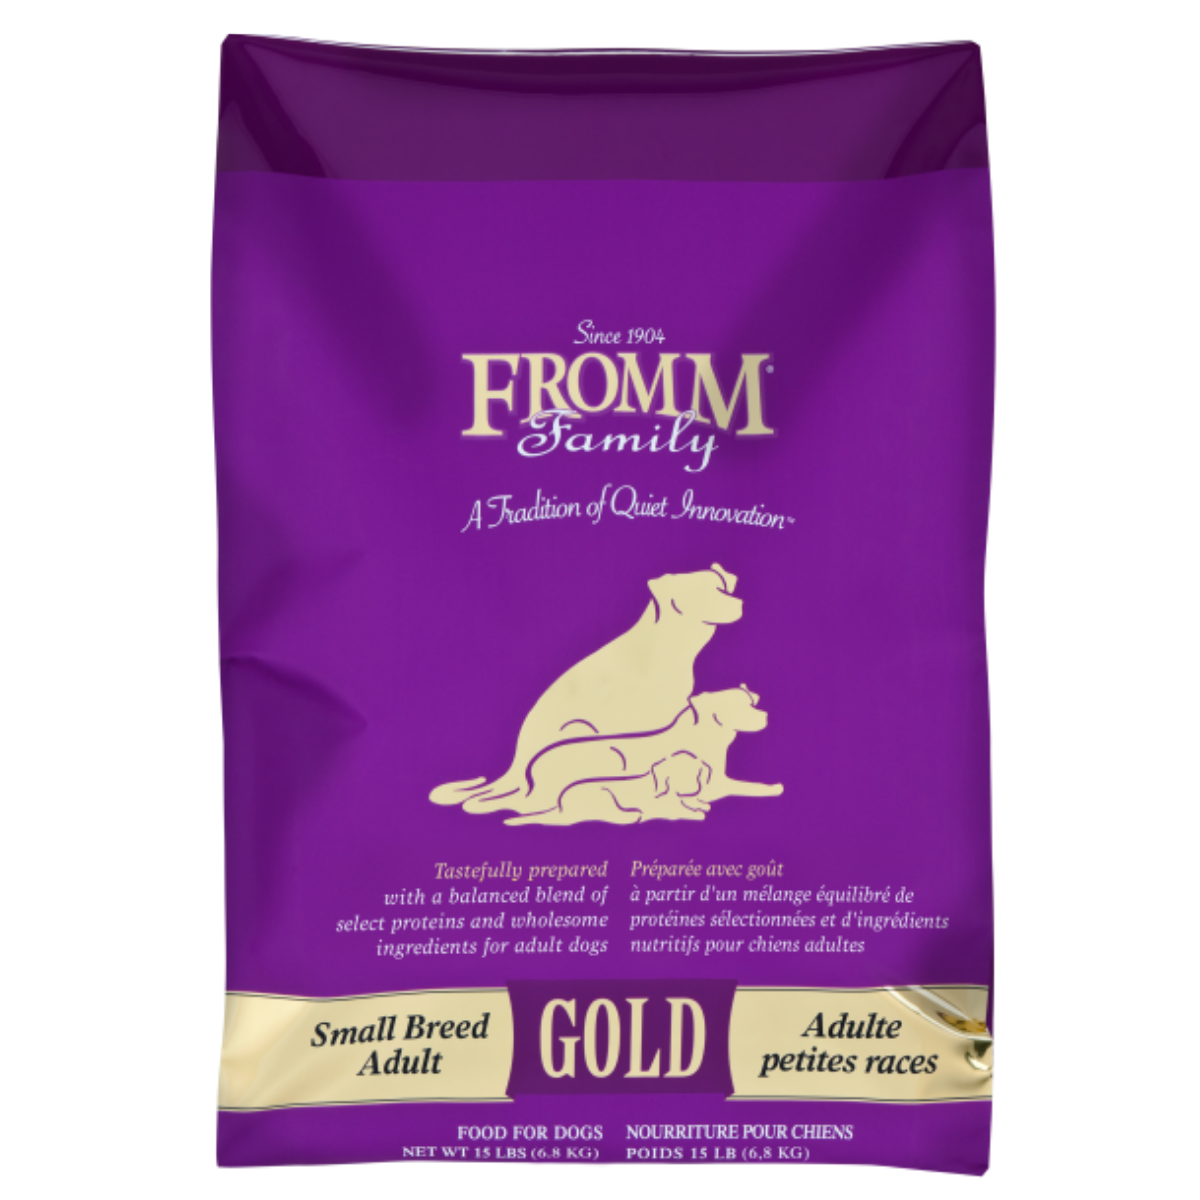 Fromm Four-star Gold - Small Breed - Very Important Paws